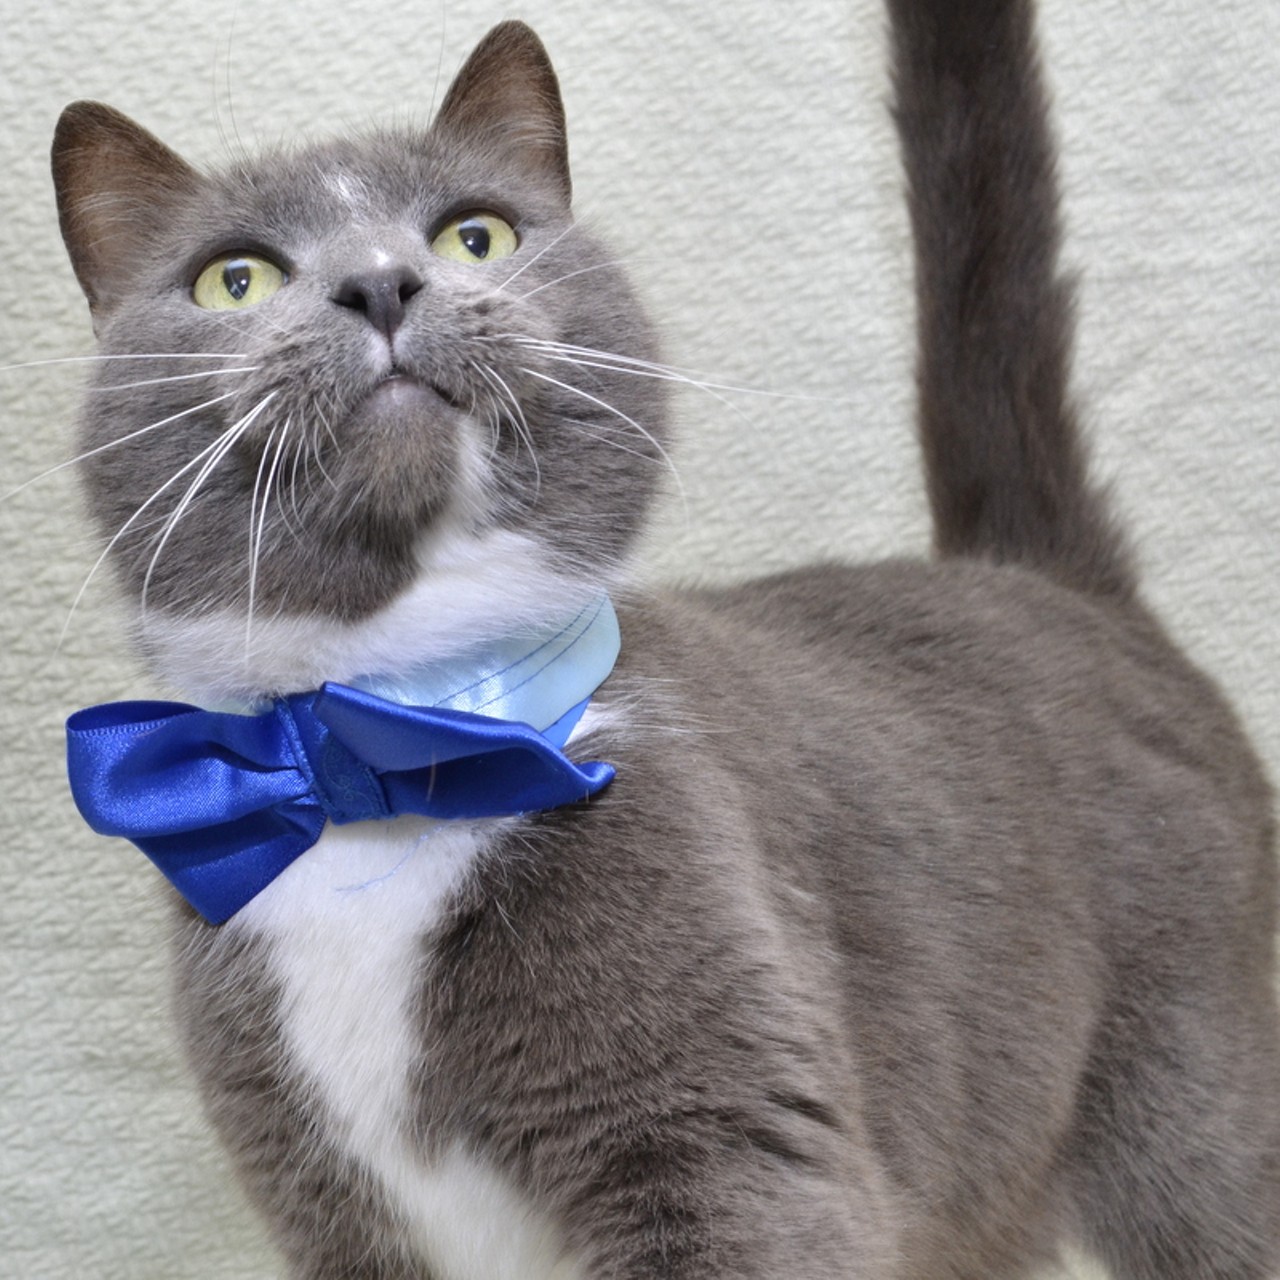 NAME:  Horton
GENDER: Male
BREED: Domestic Short Hair
AGE: 6 years
WEIGHT: 10 pounds
SPECIAL CONSIDERATIONS: None
REASON I CAME TO MHS: Homeless in Westland
LOCATION: Premier Pet Supply of Novi
ID NUMBER: 867276